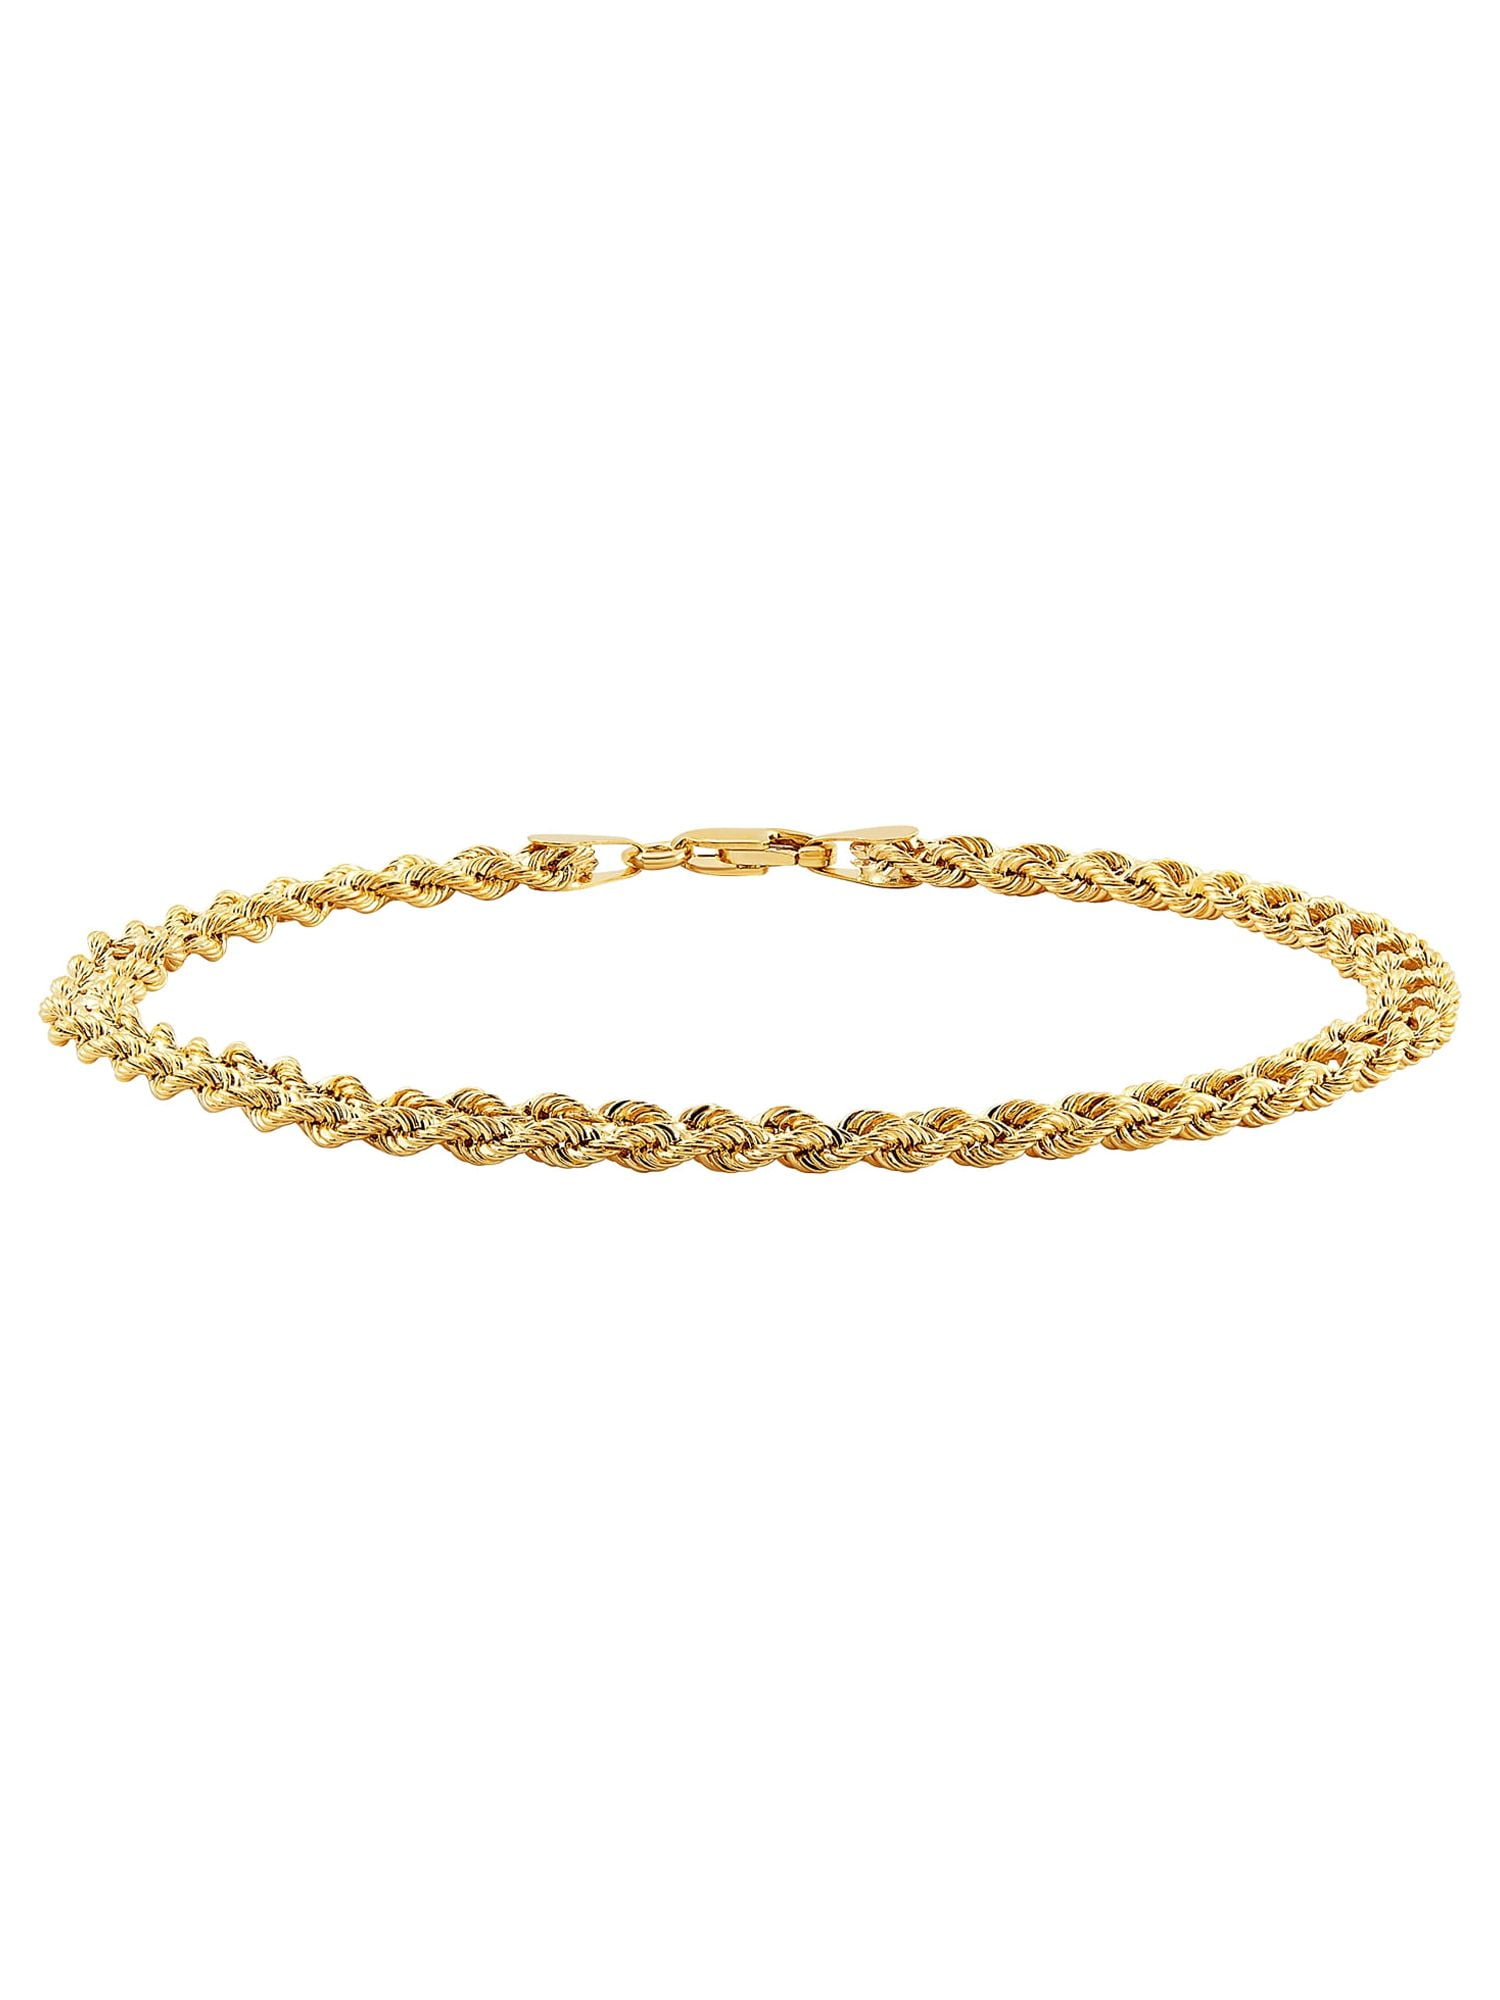 italian bangle bracelet in 18 kt yellow gold made in italy